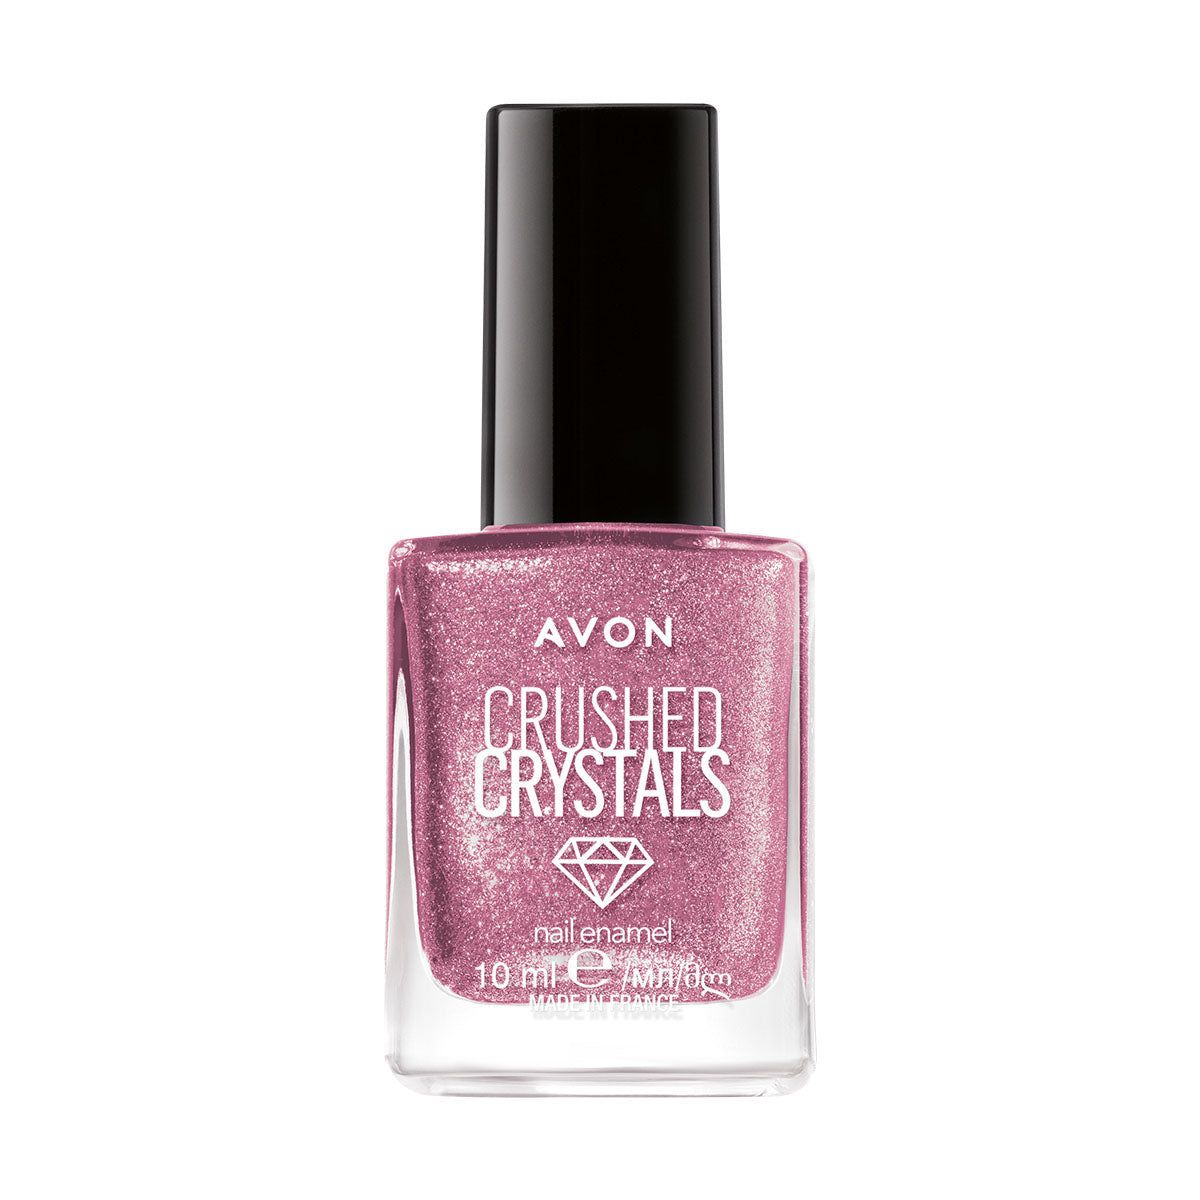 Crushed Crystals Vernis à Ongles 10ml